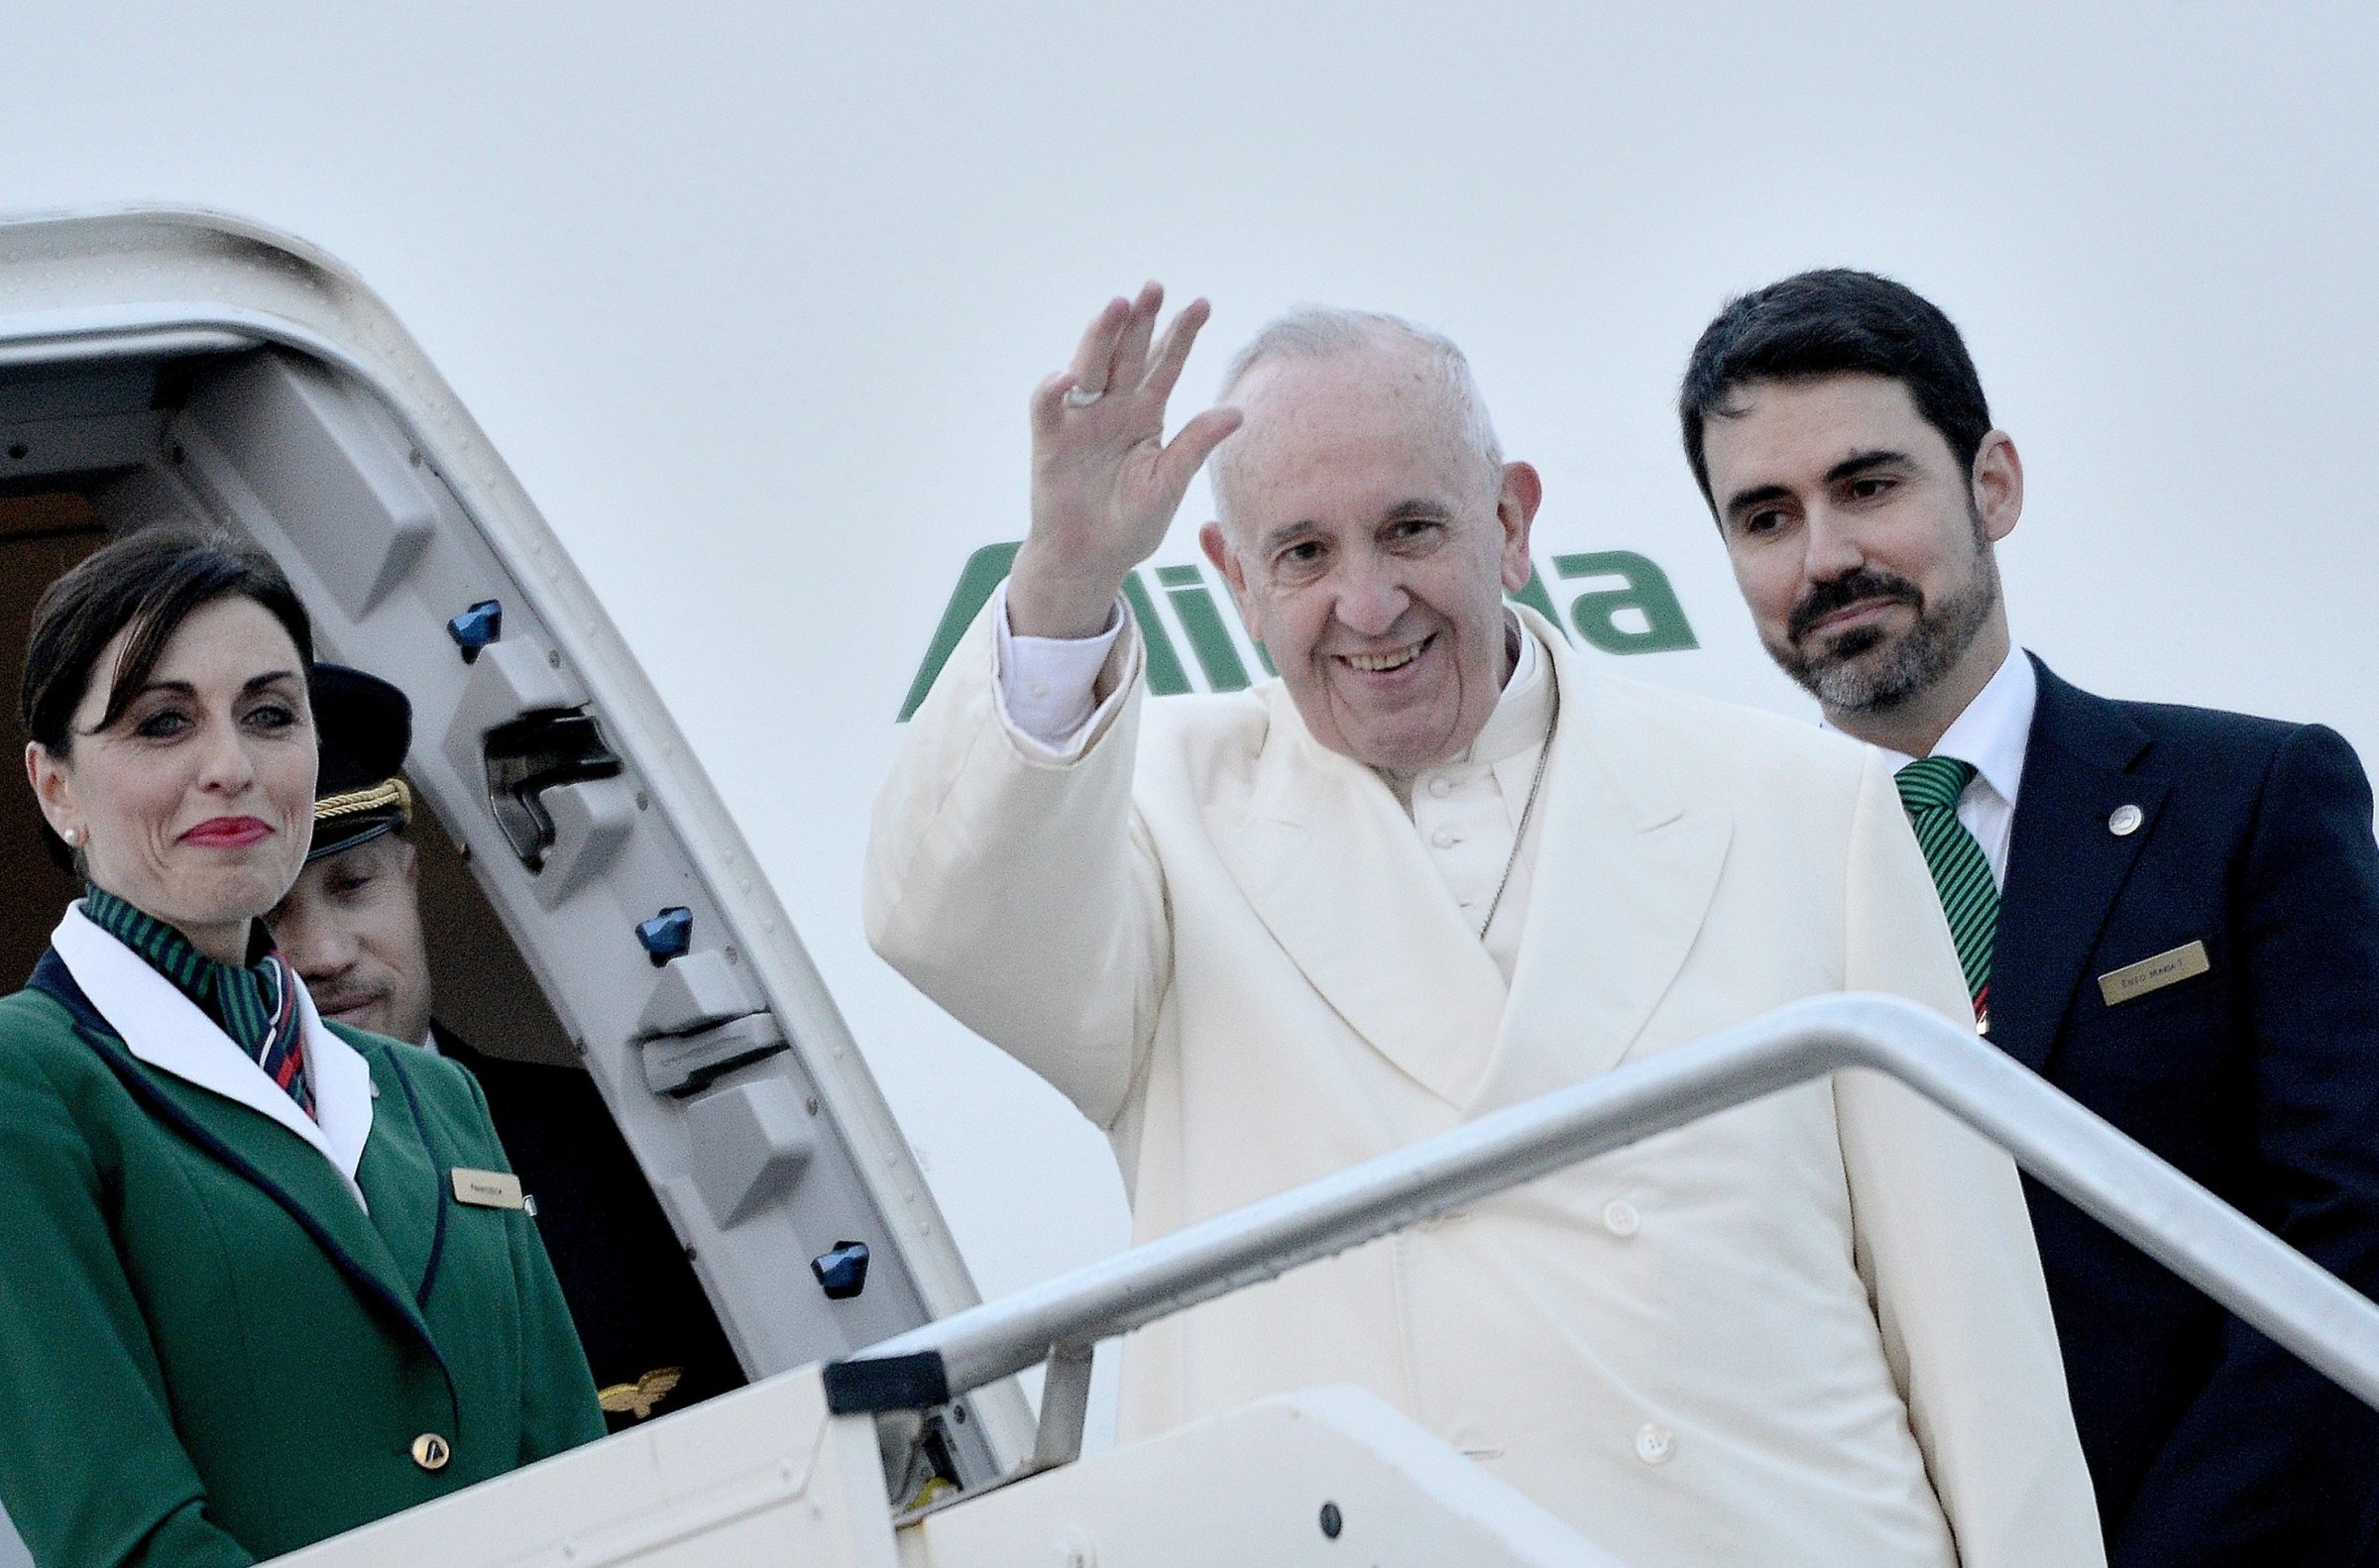 Pope Francis at Rome's Fiumicino airport on his way to Mexico for a week-long trip, on Feb. 12, 2016. He is scheduled to stop in Cuba for an historical meeting with Russian Orthodox Patriarch Kirill.